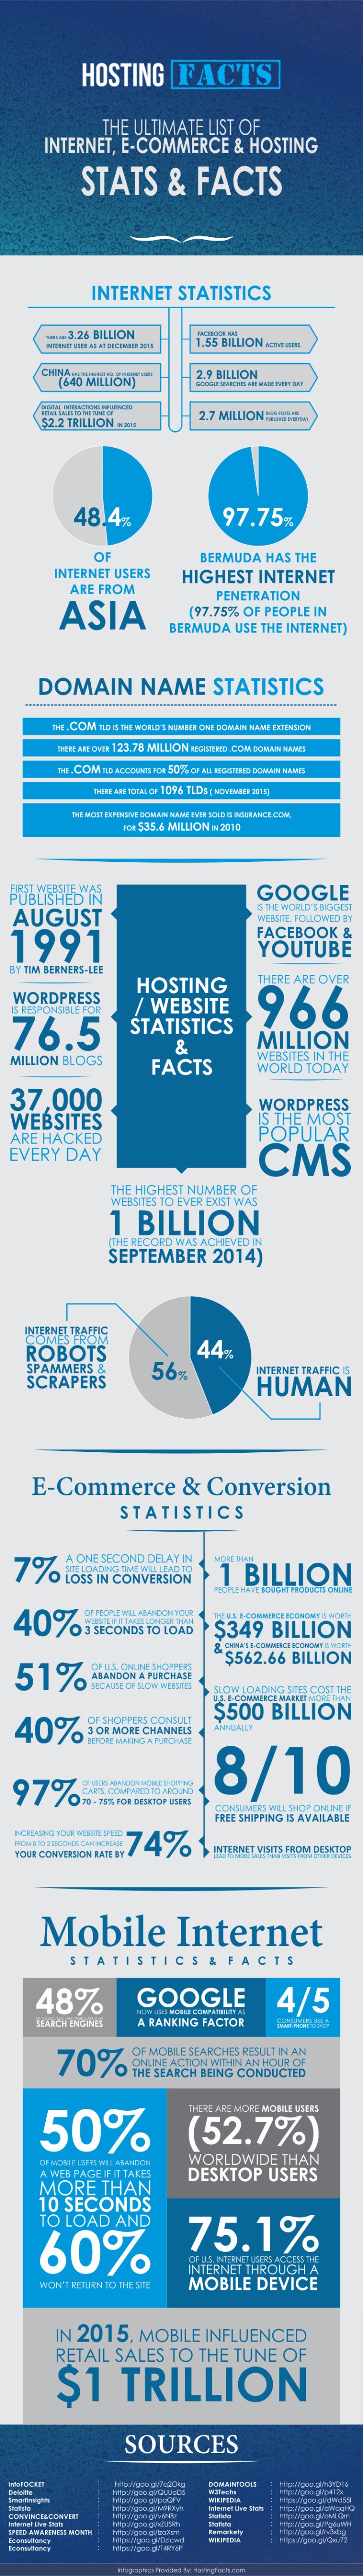 Internet Stats & Facts Infographic